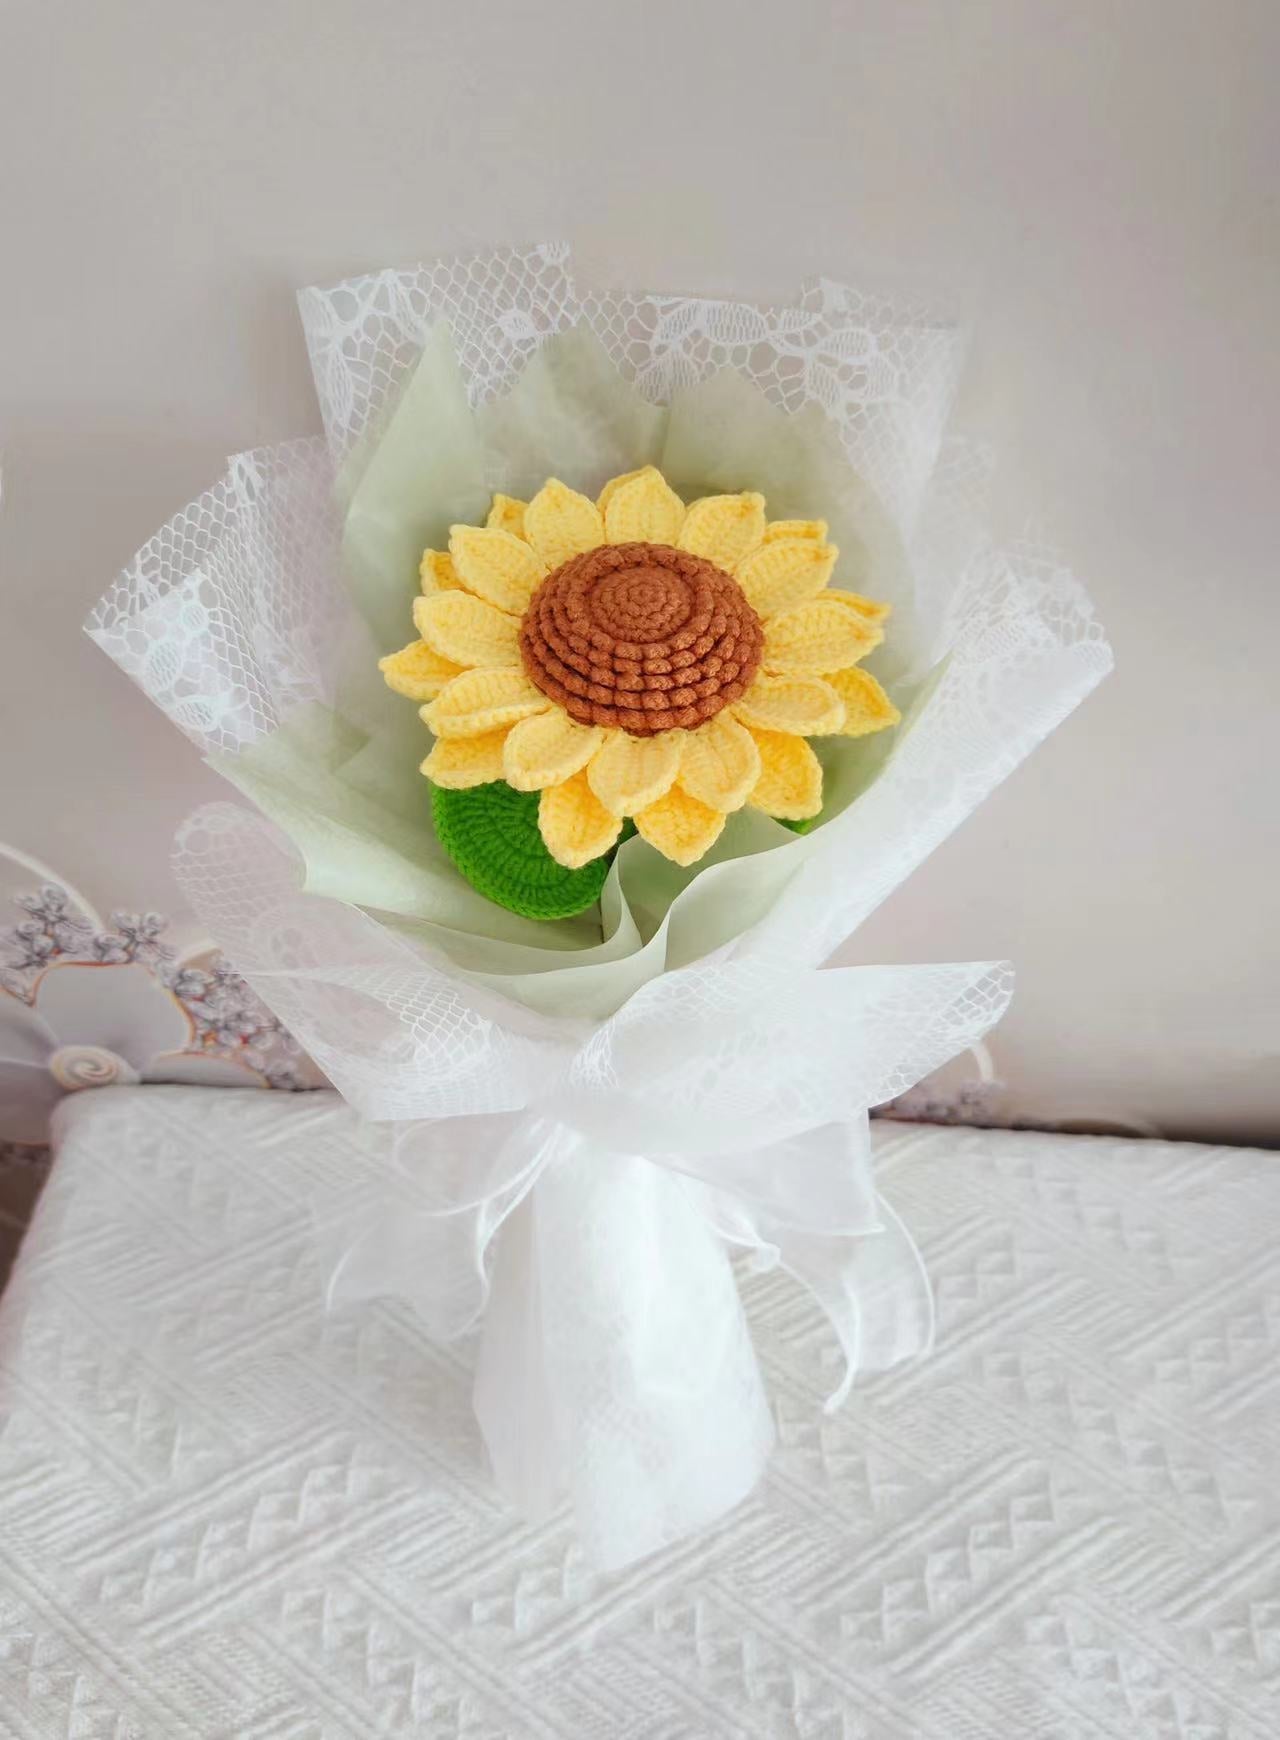 Handcrafted Sunflower Bouquet for Home Decor